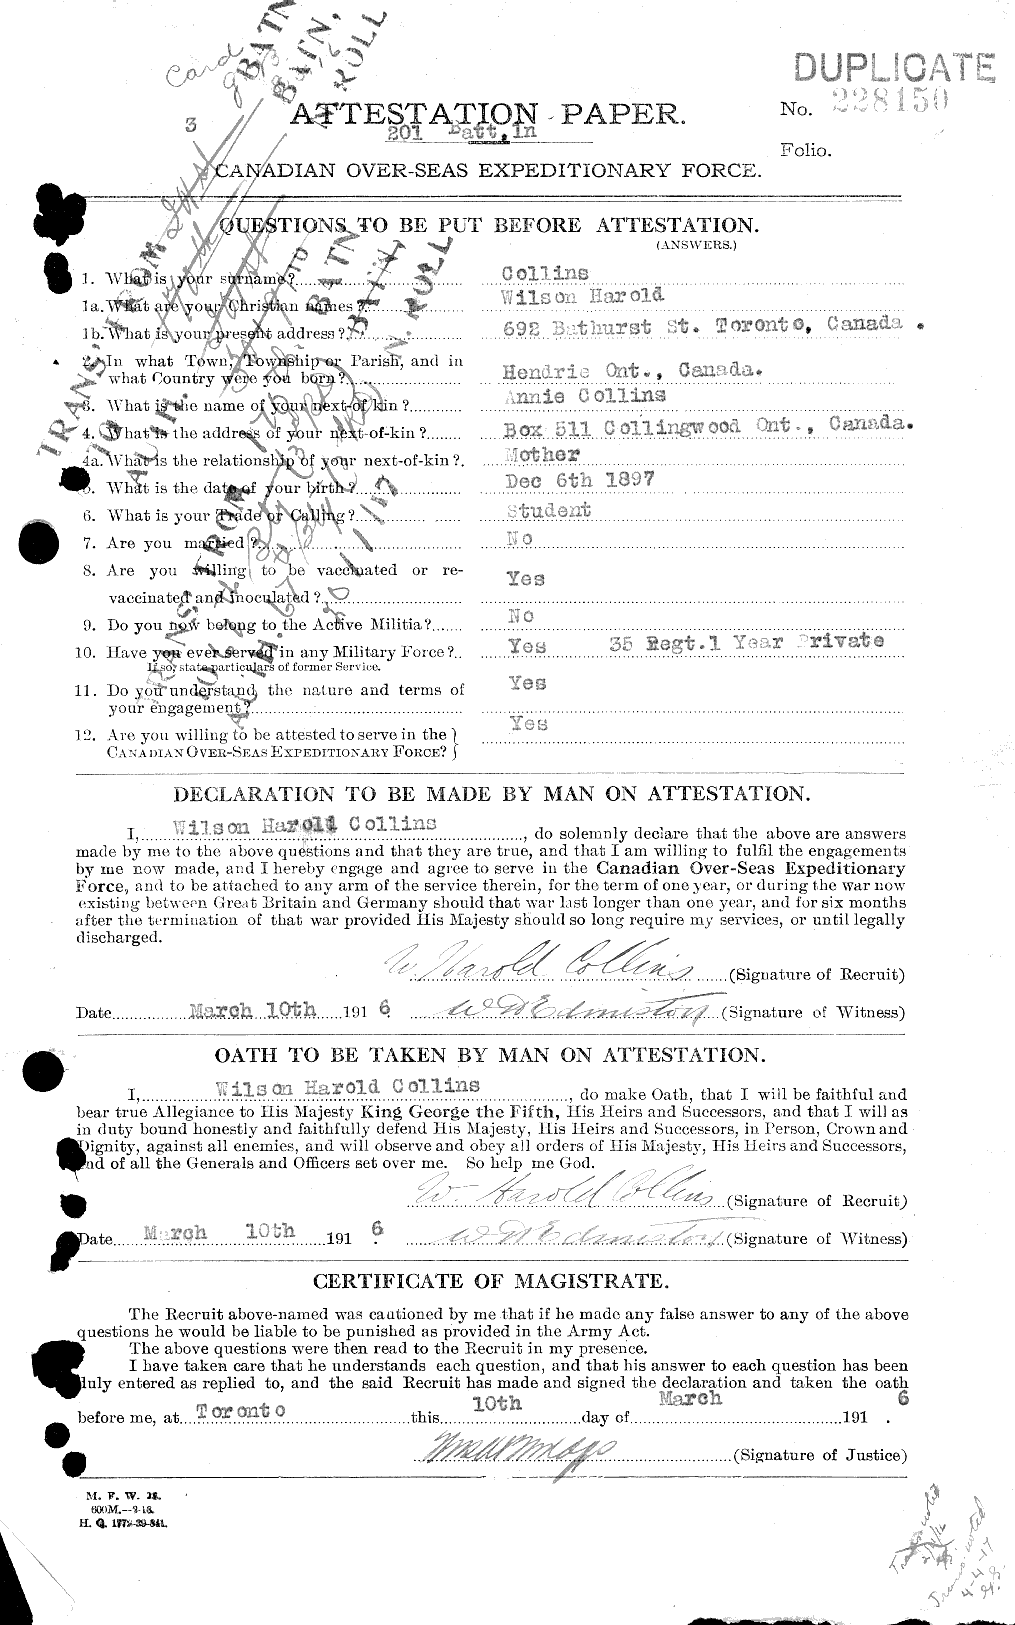 Personnel Records of the First World War - CEF 034639a